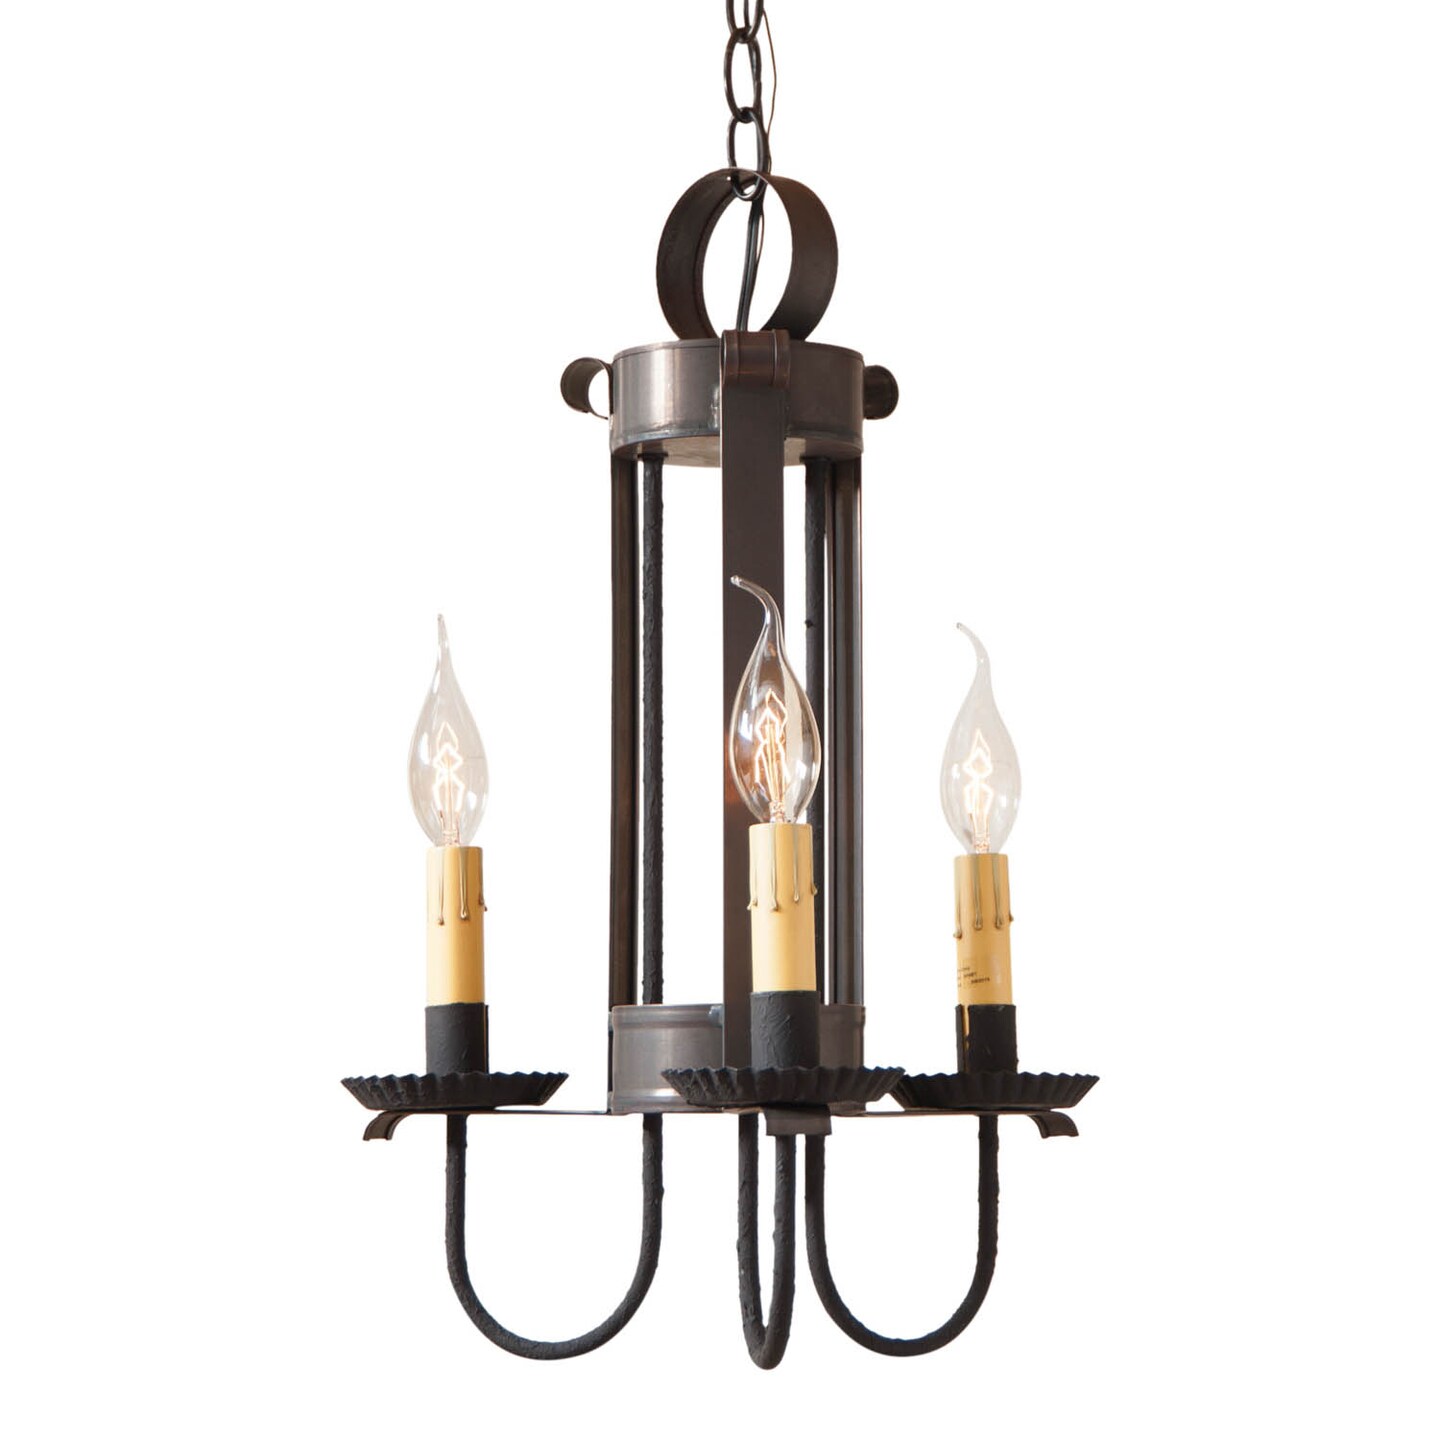 Irvins Country Tinware Large Amherst Hanging Light in Kettle Black